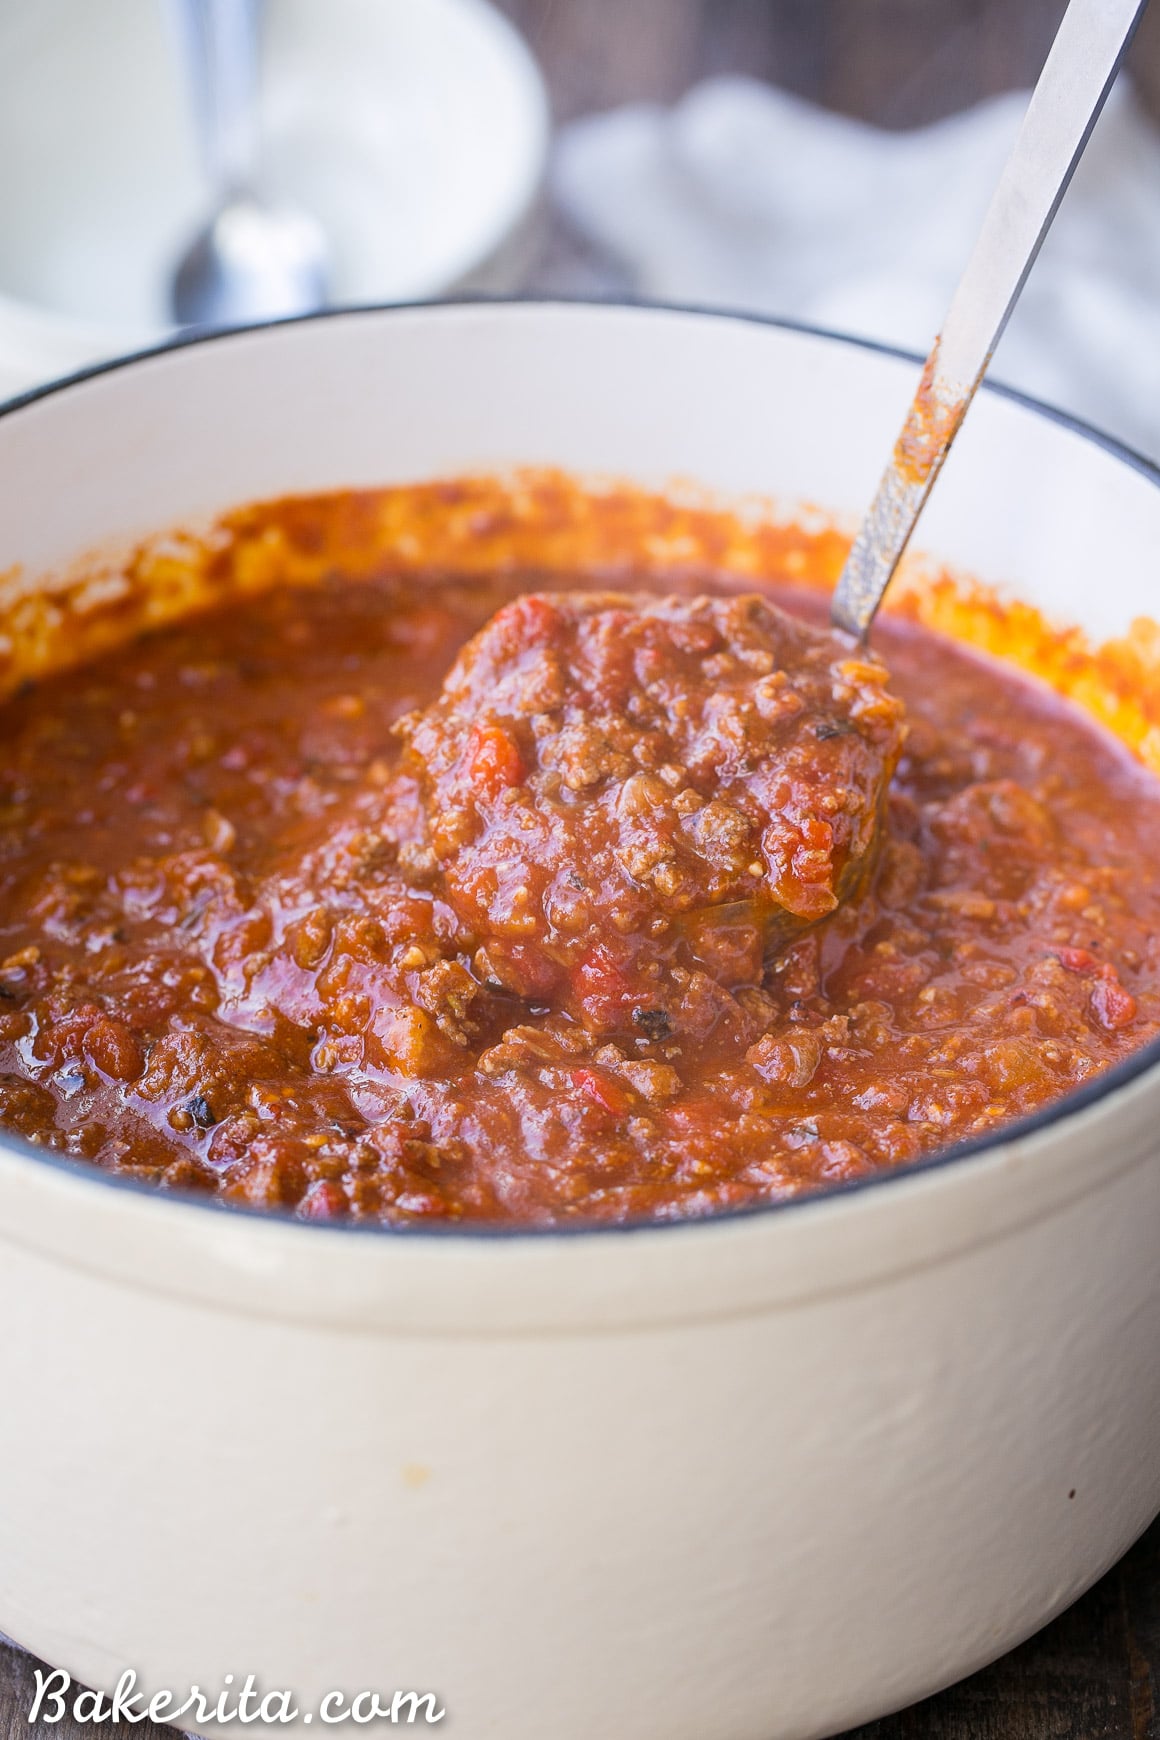 This Paleo Chili is a bean-free, Whole30-approved take on my award winning best chili recipe! It’s a hearty, flavorful chili made with ground beef, sausage, bacon and a wonderful blend of spices.